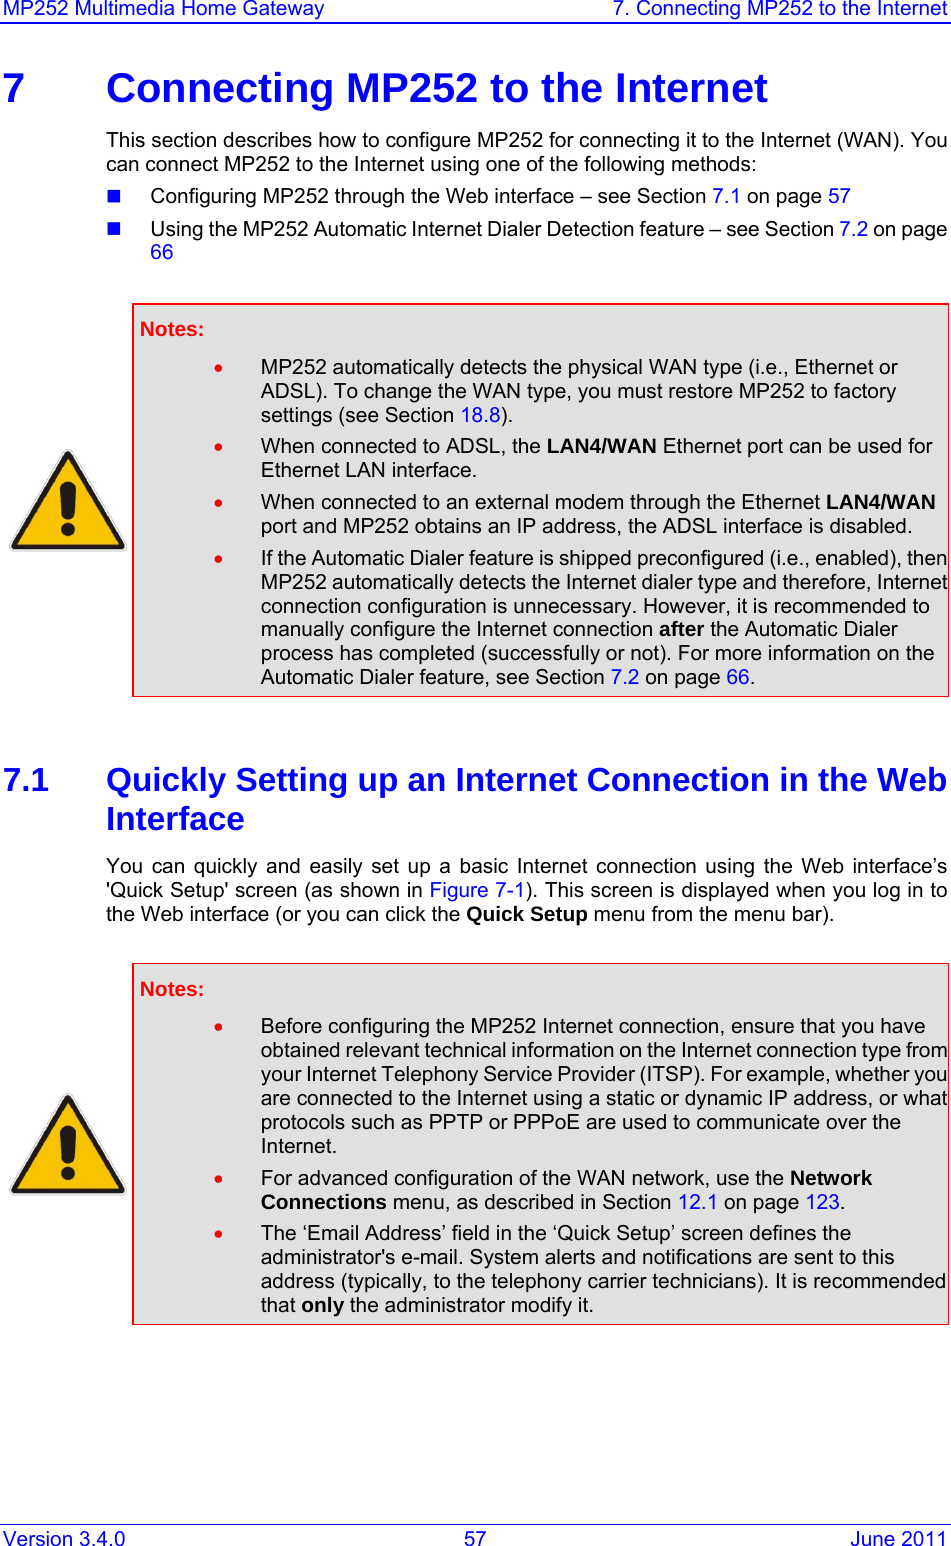 MP252 Multimedia Home Gateway  7. Connecting MP252 to the Internet Version 3.4.0  57  June 2011 7  Connecting MP252 to the Internet This section describes how to configure MP252 for connecting it to the Internet (WAN). You can connect MP252 to the Internet using one of the following methods:  Configuring MP252 through the Web interface – see Section 7.1 on page 57  Using the MP252 Automatic Internet Dialer Detection feature – see Section 7.2 on page 66   Notes:  • MP252 automatically detects the physical WAN type (i.e., Ethernet or ADSL). To change the WAN type, you must restore MP252 to factory settings (see Section 18.8). • When connected to ADSL, the LAN4/WAN Ethernet port can be used for Ethernet LAN interface.  • When connected to an external modem through the Ethernet LAN4/WAN port and MP252 obtains an IP address, the ADSL interface is disabled. • If the Automatic Dialer feature is shipped preconfigured (i.e., enabled), then MP252 automatically detects the Internet dialer type and therefore, Internet connection configuration is unnecessary. However, it is recommended to manually configure the Internet connection after the Automatic Dialer process has completed (successfully or not). For more information on the Automatic Dialer feature, see Section 7.2 on page 66.  7.1  Quickly Setting up an Internet Connection in the Web Interface You can quickly and easily set up a basic Internet connection using the Web interface’s &apos;Quick Setup&apos; screen (as shown in Figure 7-1). This screen is displayed when you log in to the Web interface (or you can click the Quick Setup menu from the menu bar).   Notes:  • Before configuring the MP252 Internet connection, ensure that you have obtained relevant technical information on the Internet connection type from your Internet Telephony Service Provider (ITSP). For example, whether you are connected to the Internet using a static or dynamic IP address, or what protocols such as PPTP or PPPoE are used to communicate over the Internet. • For advanced configuration of the WAN network, use the Network Connections menu, as described in Section 12.1 on page 123. • The ‘Email Address’ field in the ‘Quick Setup’ screen defines the administrator&apos;s e-mail. System alerts and notifications are sent to this address (typically, to the telephony carrier technicians). It is recommended that only the administrator modify it.  